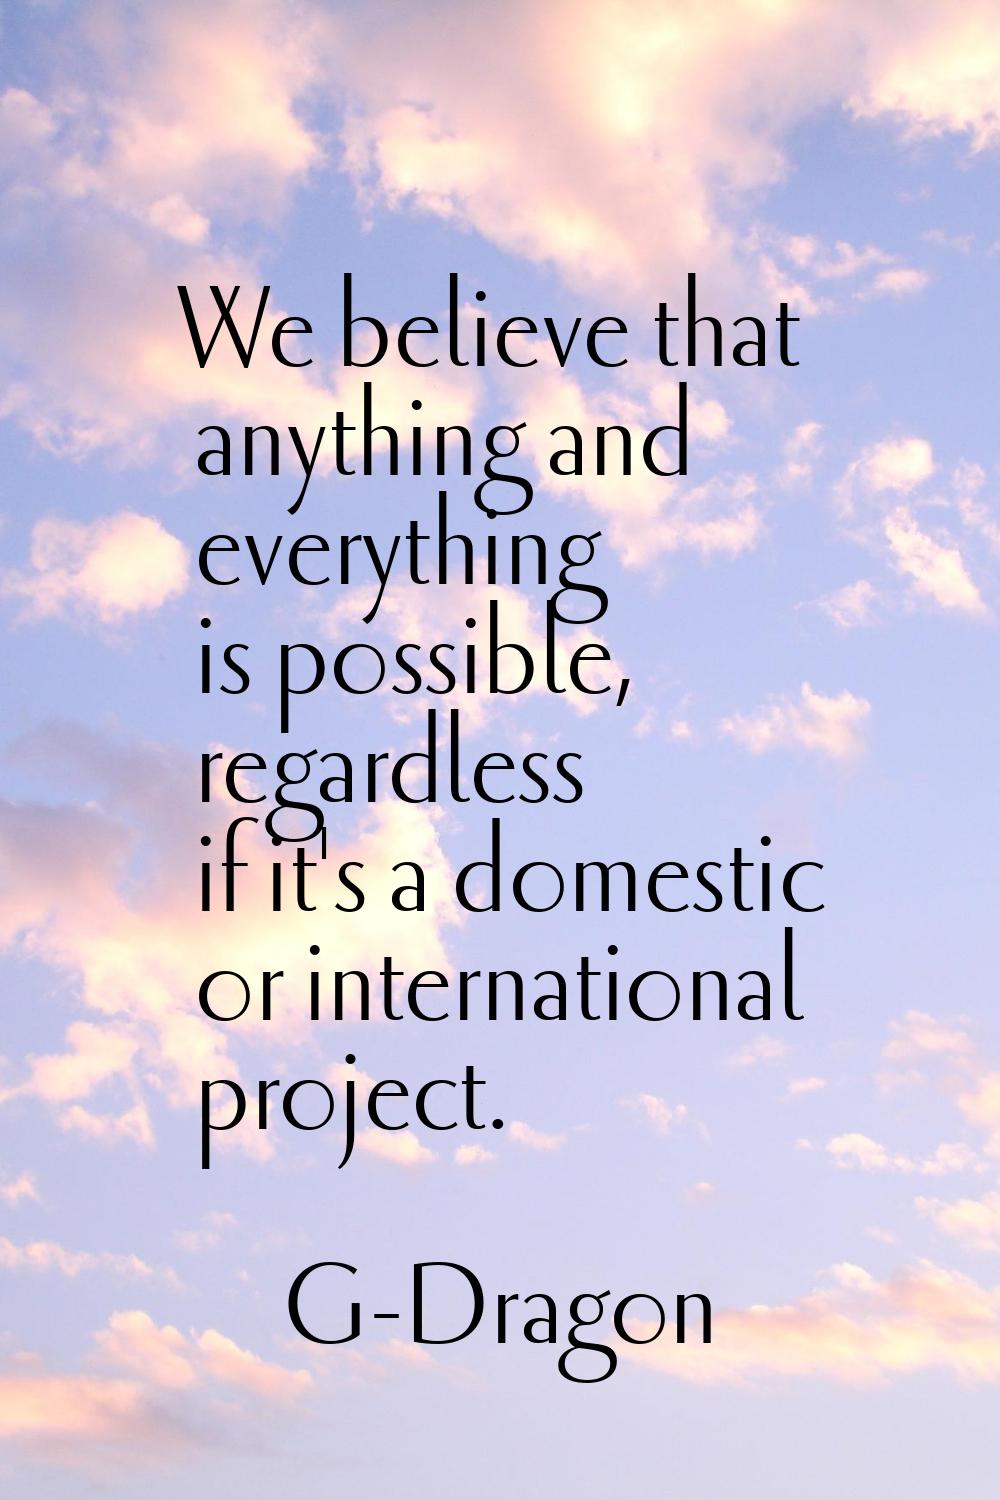 We believe that anything and everything is possible, regardless if it's a domestic or international